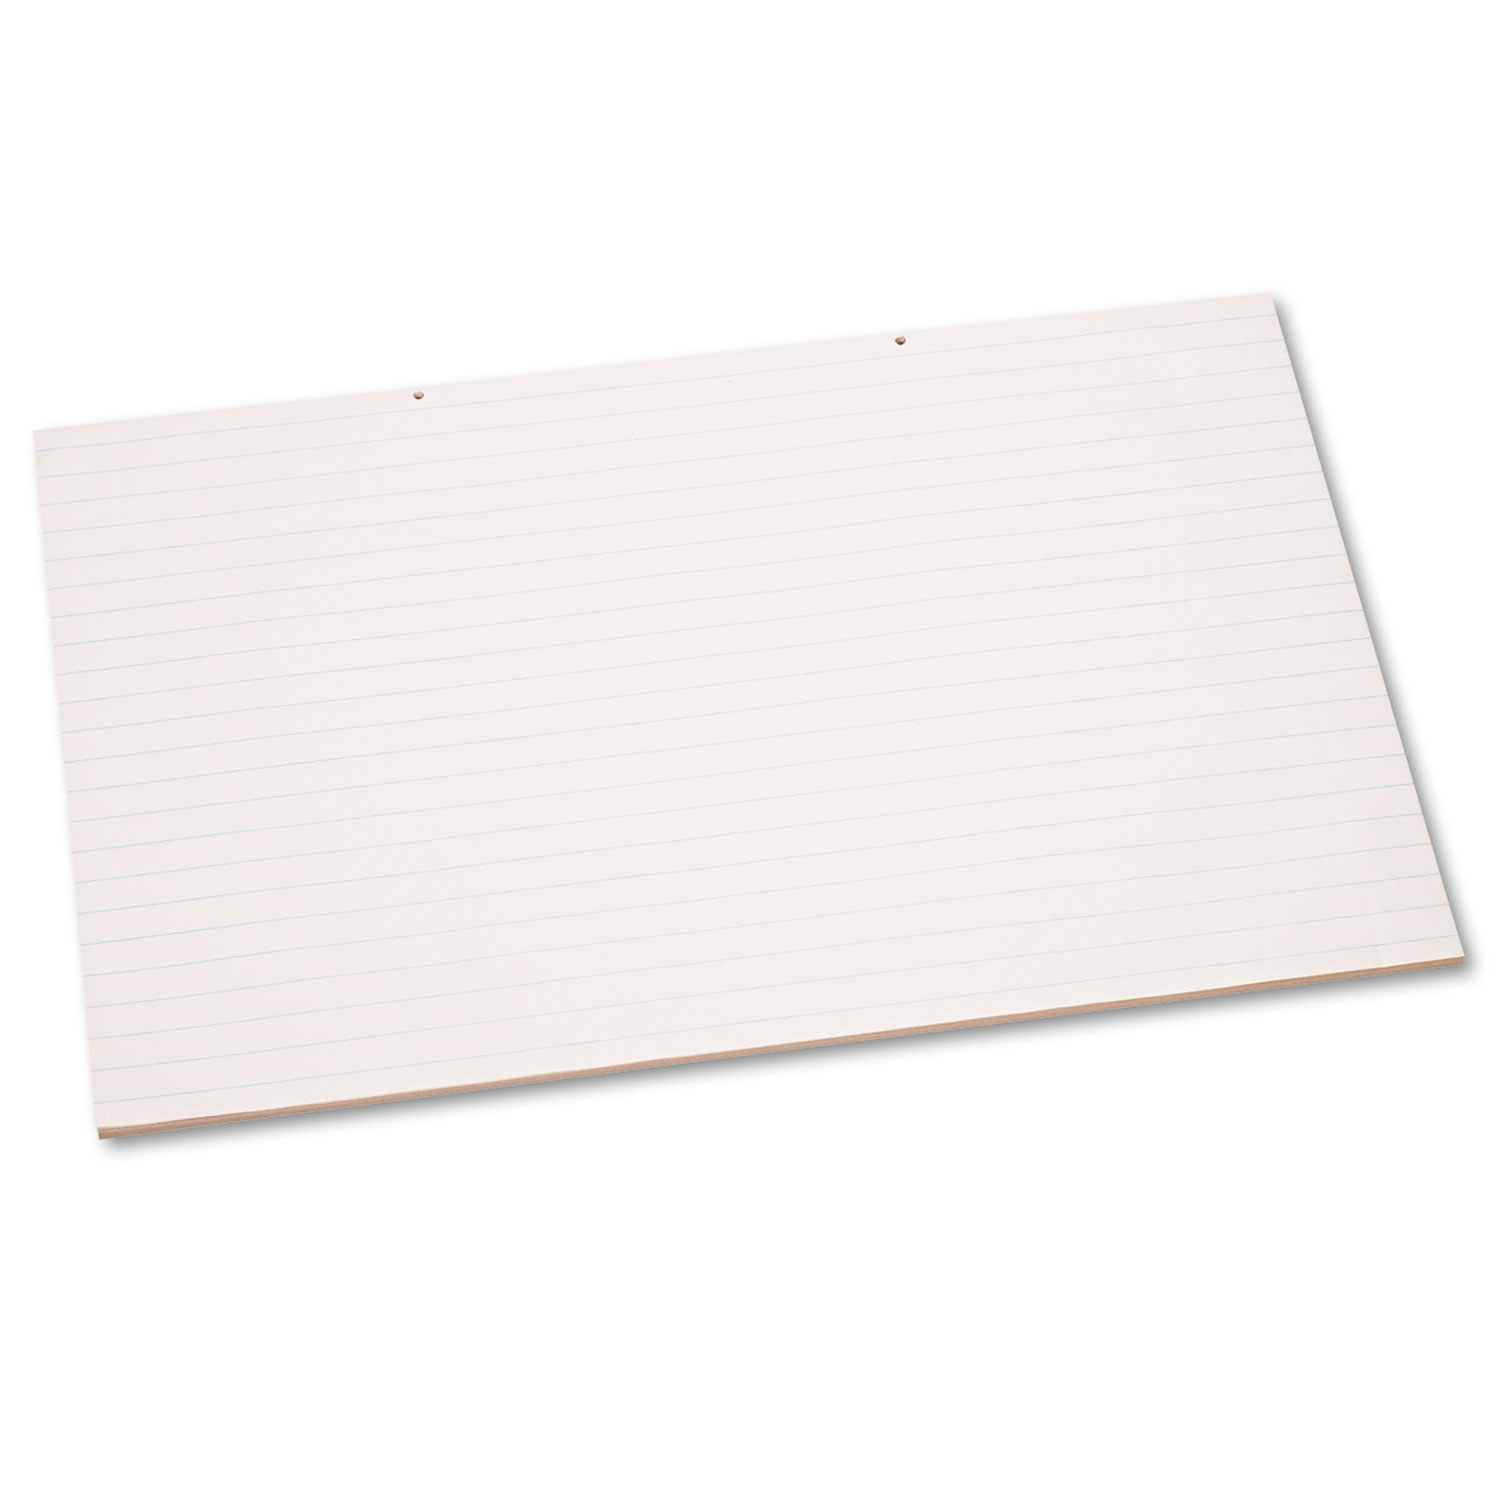  Pacon 3051 Primary Chart Pad, Presentation Rule, 36 x 24, 100 Sheets (PAC3051) 